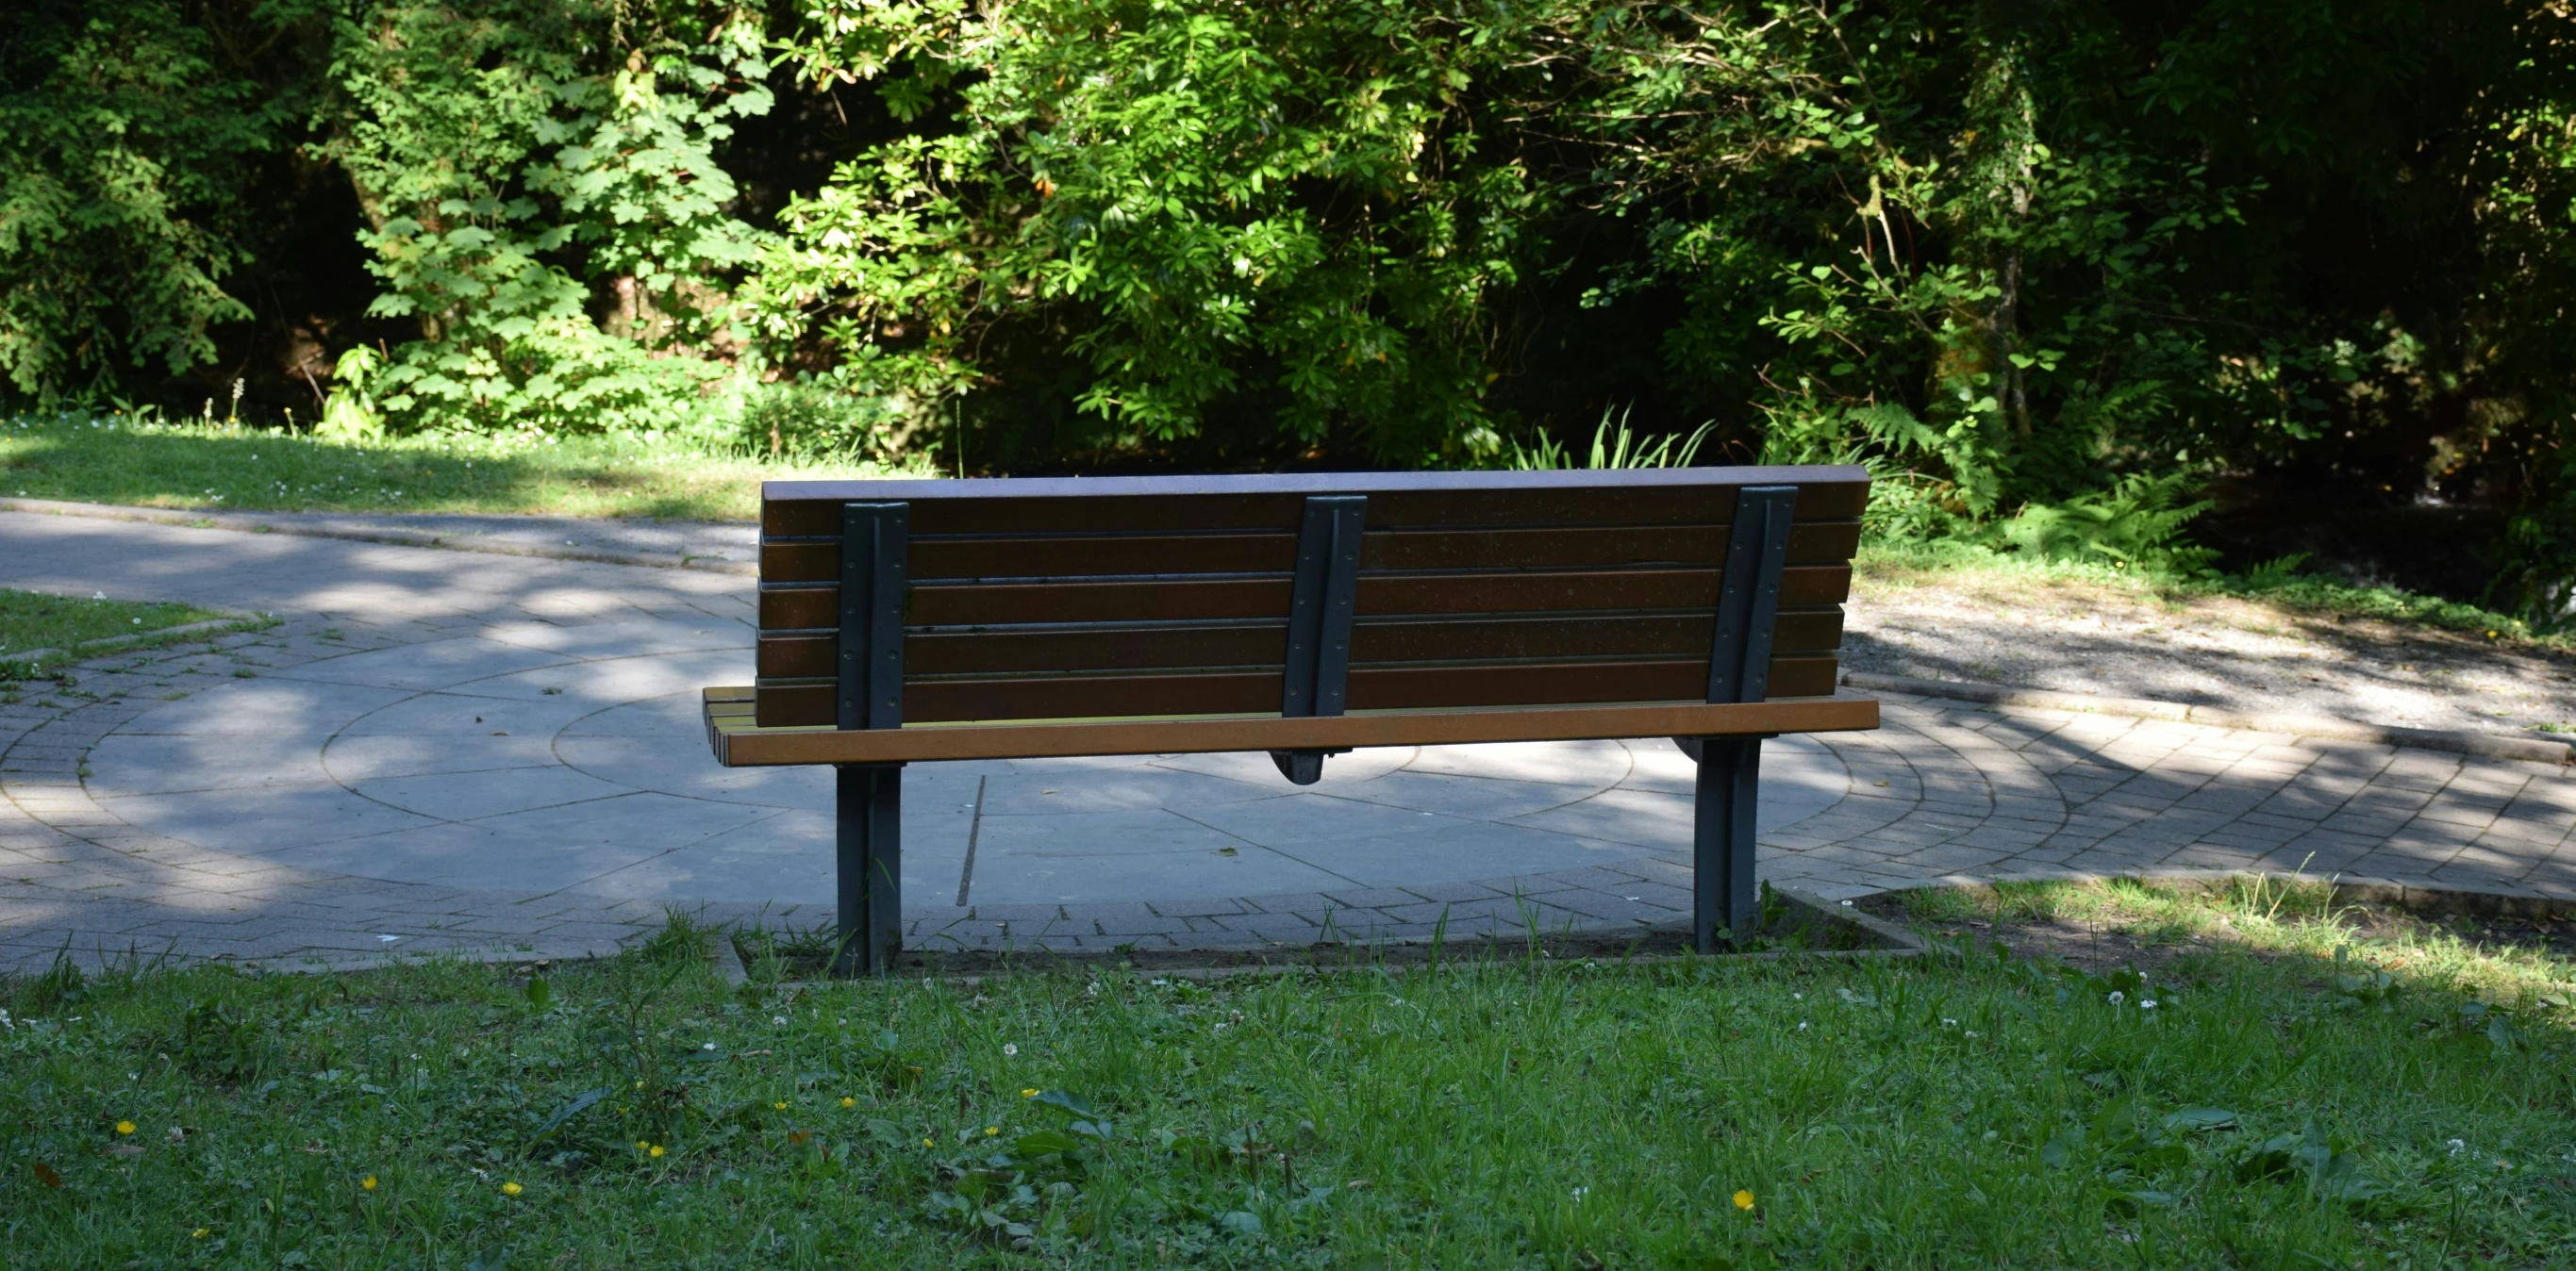 a wooden bench in the middle of a park